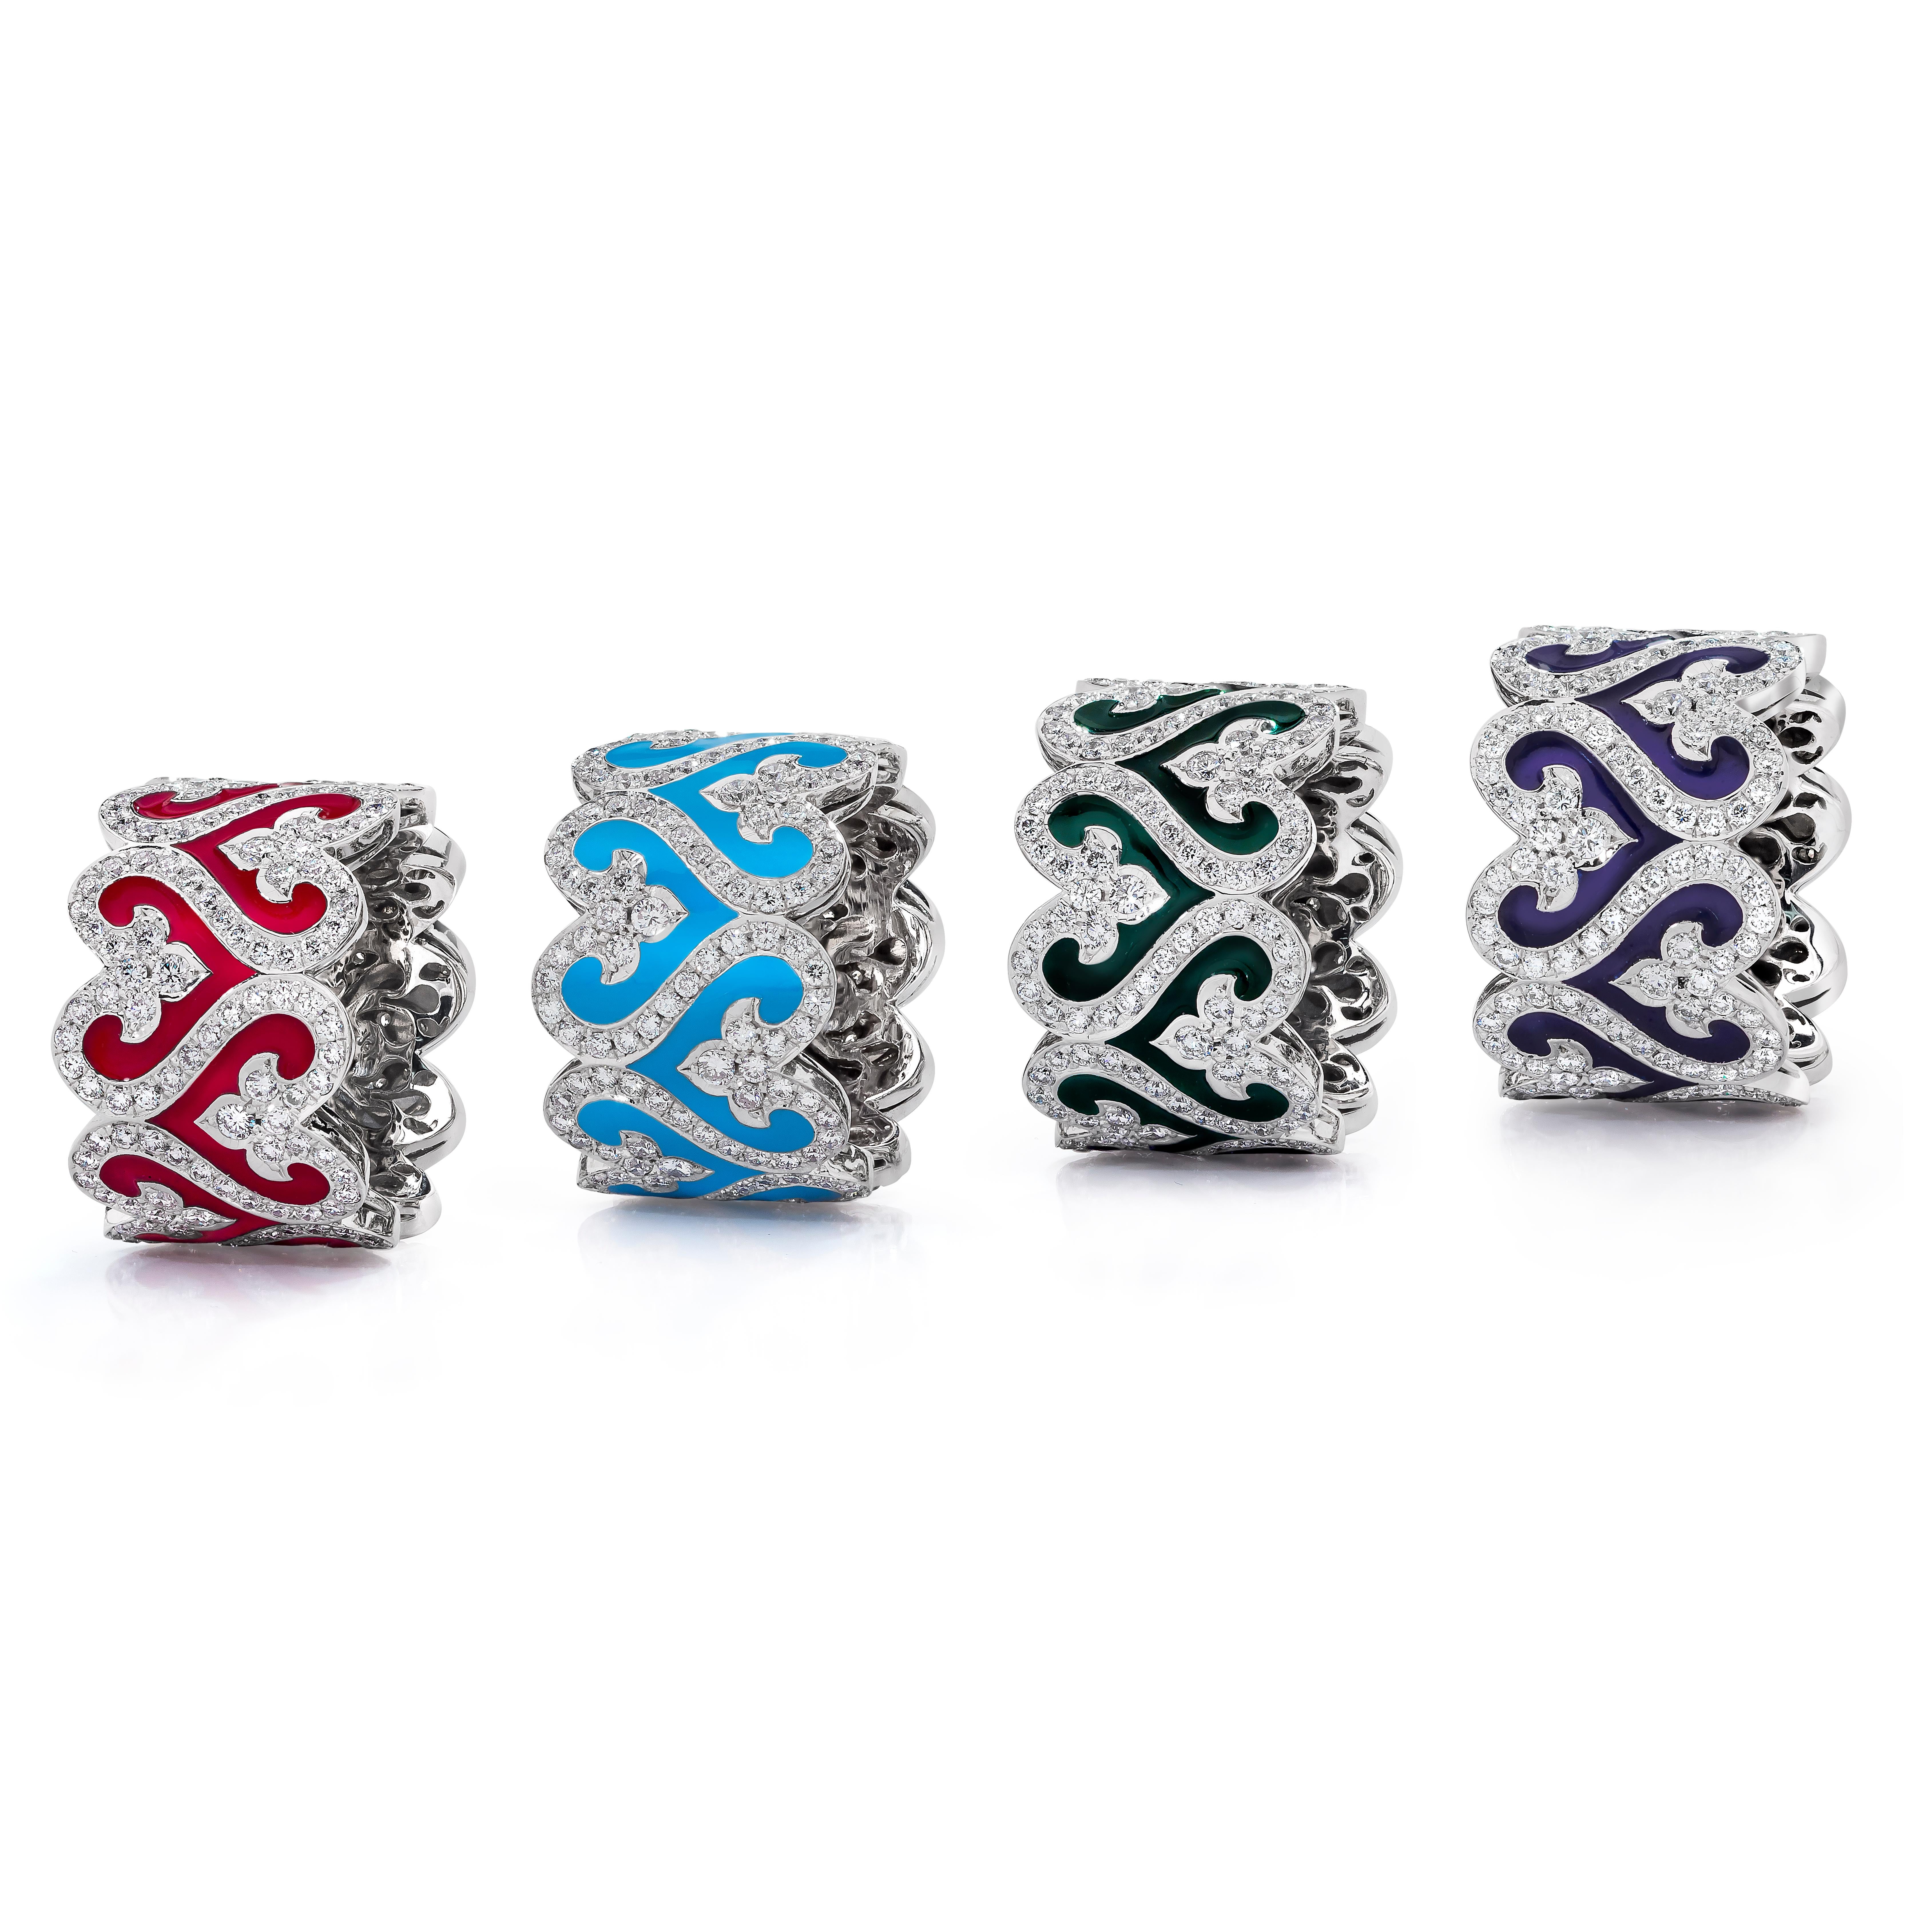 Enamel and Diamond Wide Band Rings

Each Ring consists of 220 Round Brilliant Diamonds weighing 2.44 Carats Set in 18 Karat White Gold.

Emerald, Ruby, Sapphire and Turquoise colored Enamel.